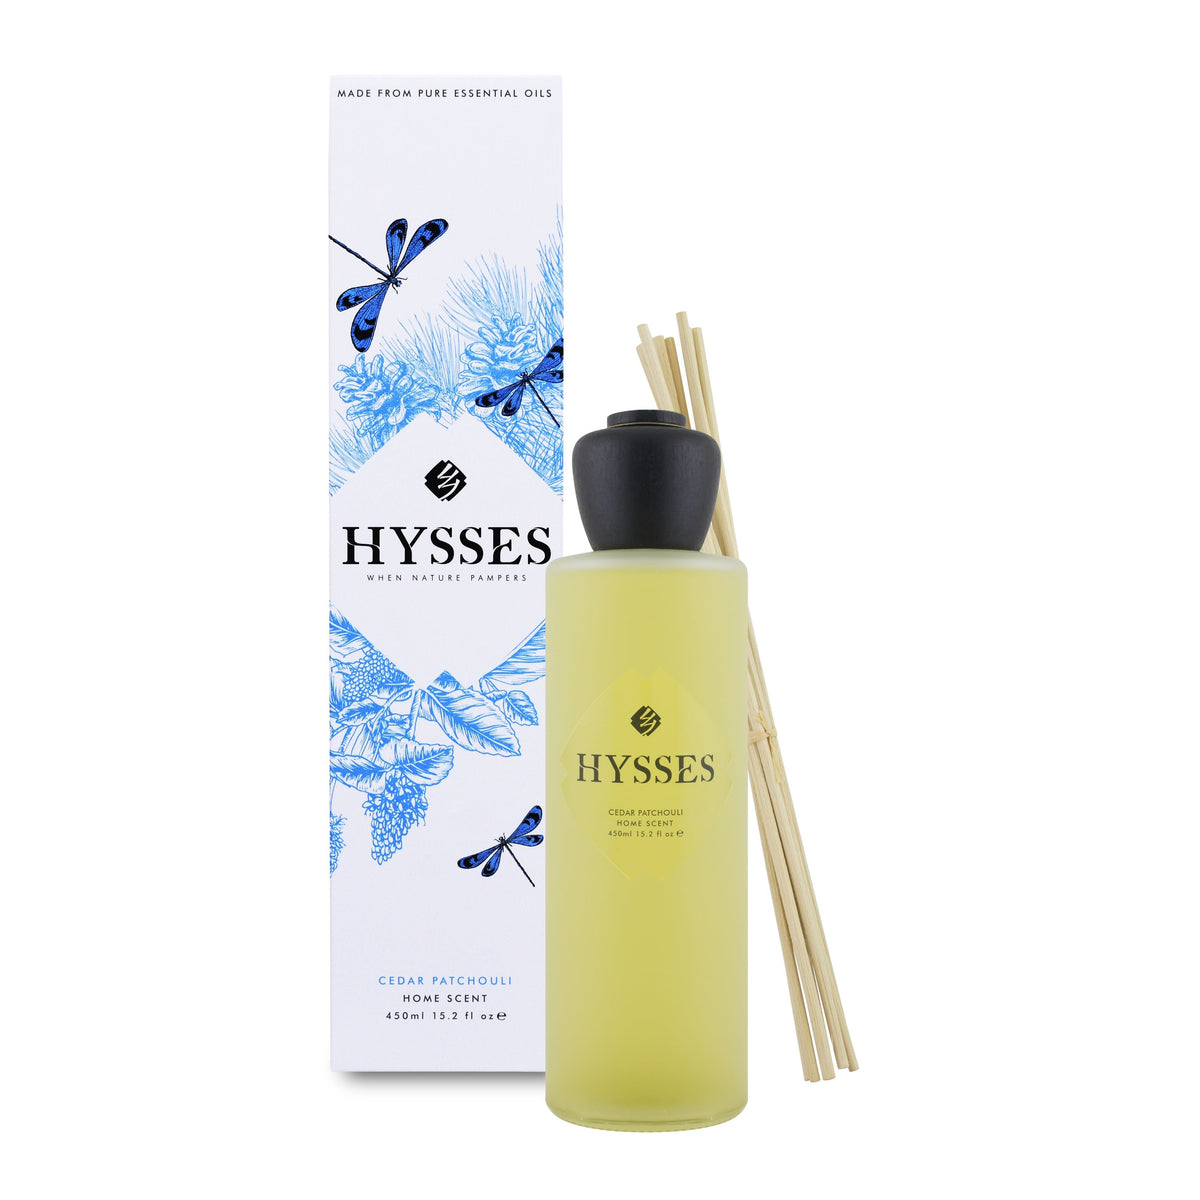 Hysses Home Scents 450ml Home Scent Reed Diffuser Cedar Patchouli